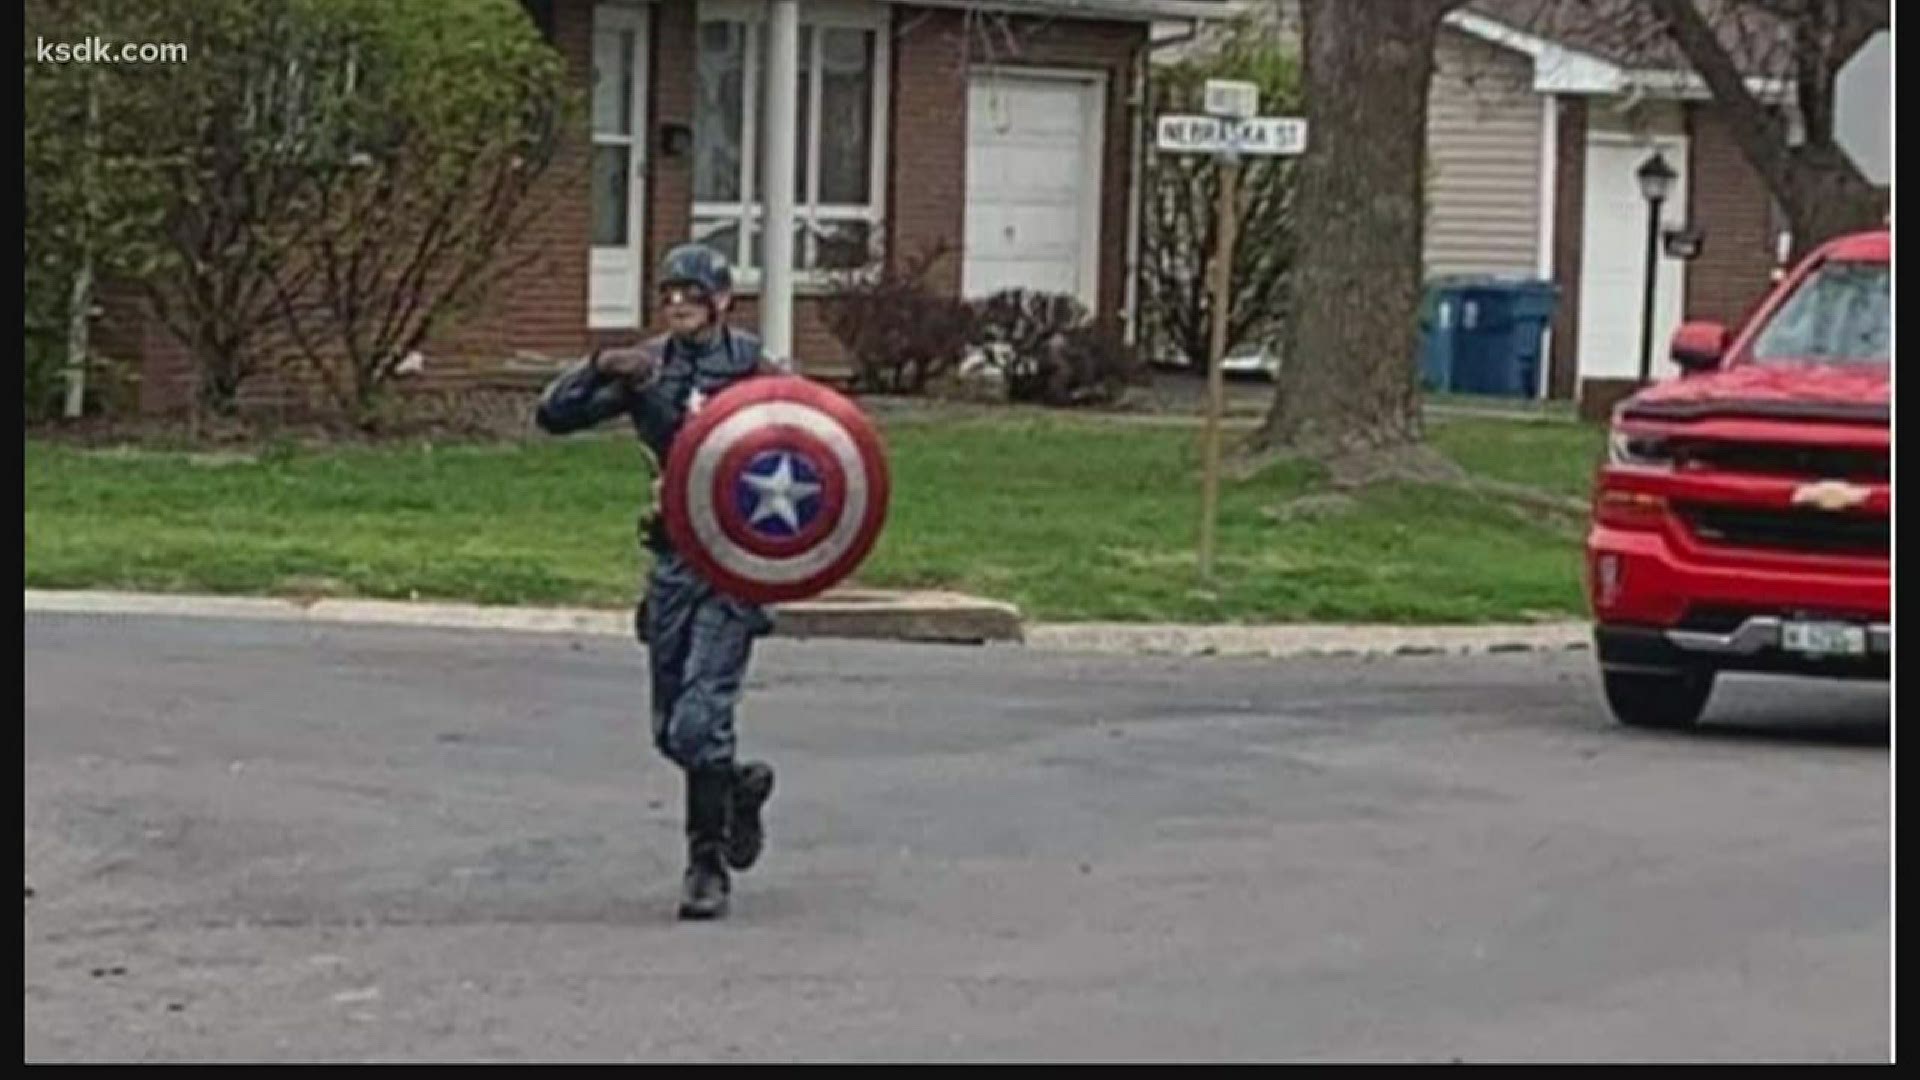 A former police officer is dressing up as Captain America and running through the streets of Bethalto, Illlinois, all to bring a little hope to kids